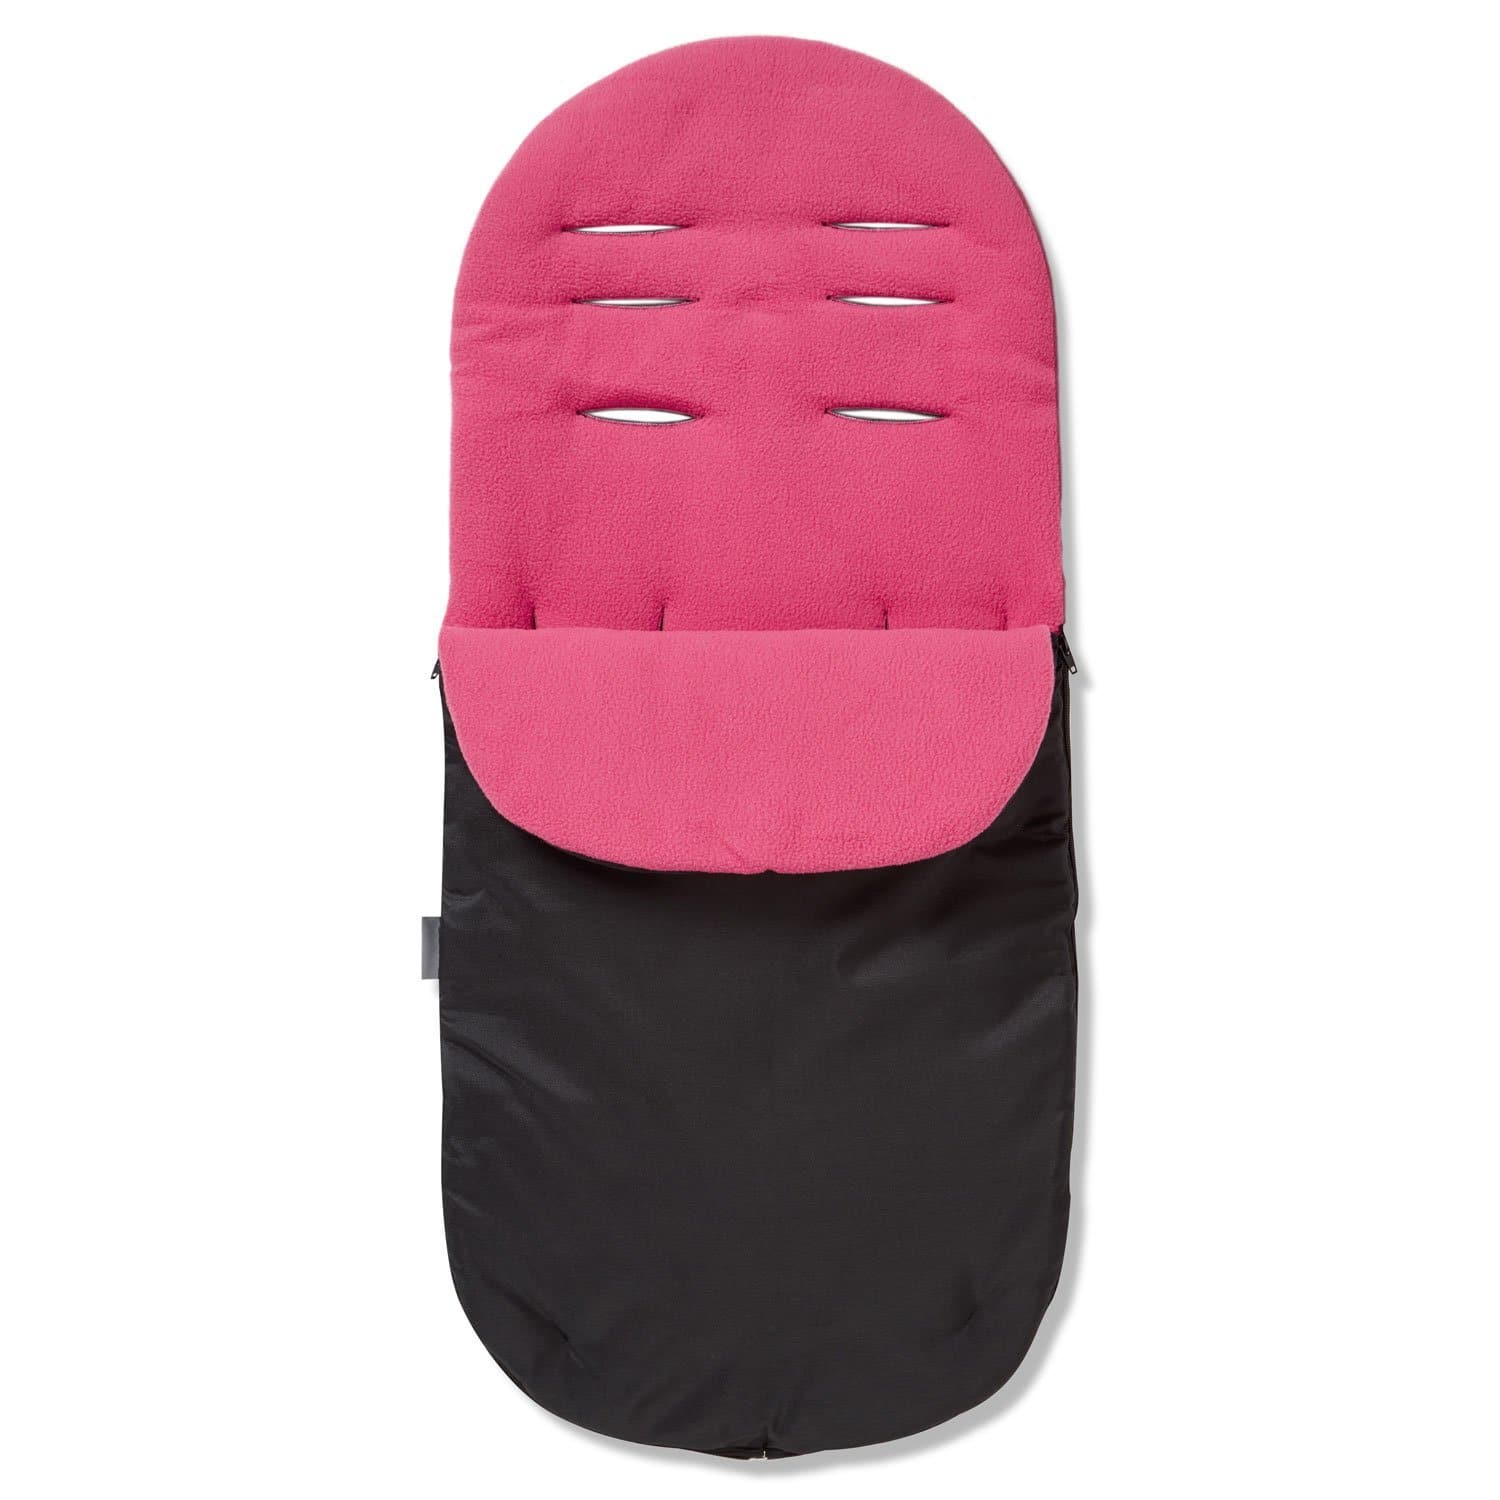 Footmuff / Cosy Toes Compatible with Red Castle - Dark Pink / Fits All Models | For Your Little One